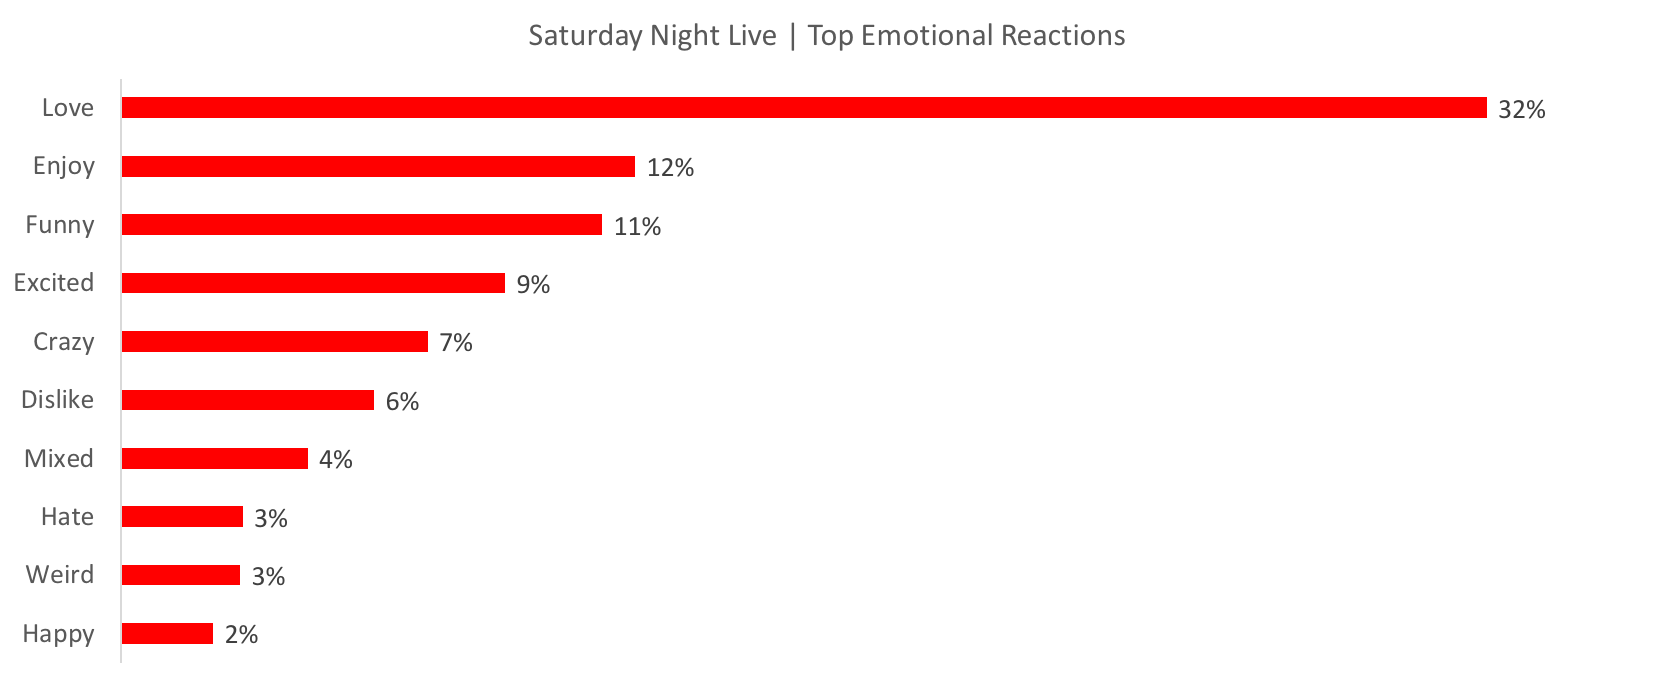 Source: Canvs Compare, Top Emotional Reactions from the weekend October 3 - 4